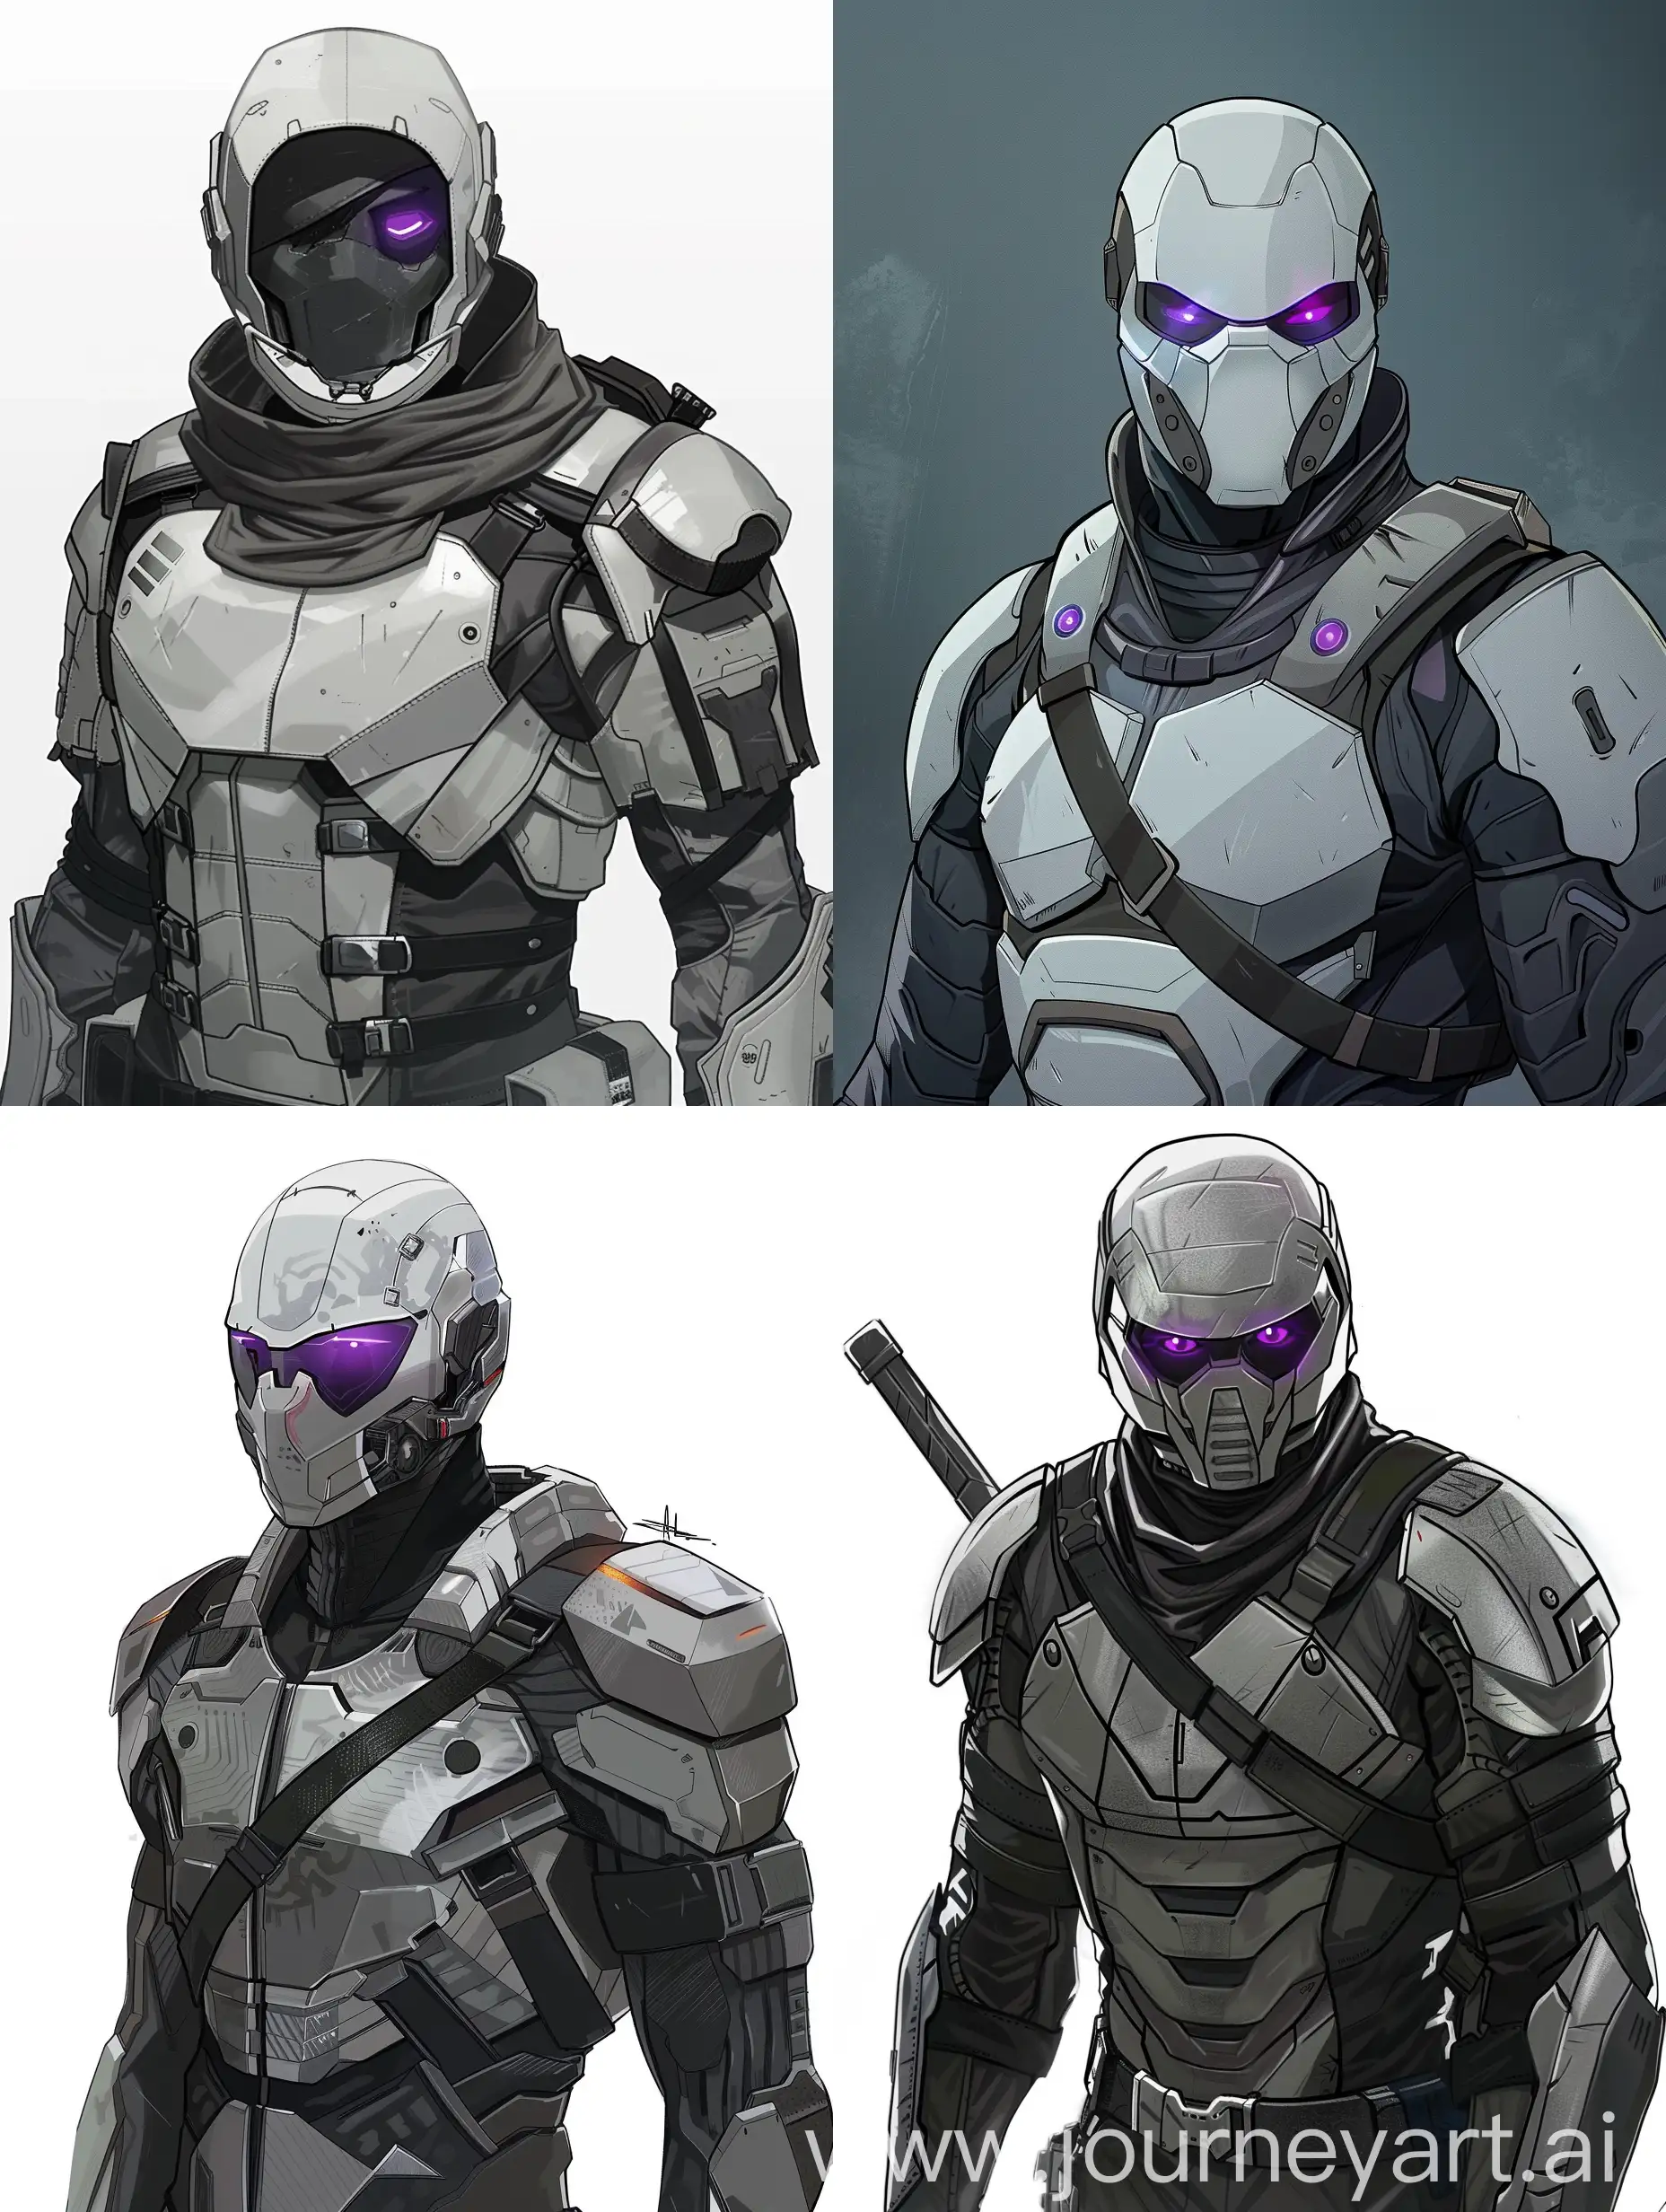 cartoon reference style, Character concept art, assasin, armor, purple eyes silver tactical suit, dark sci fi mask